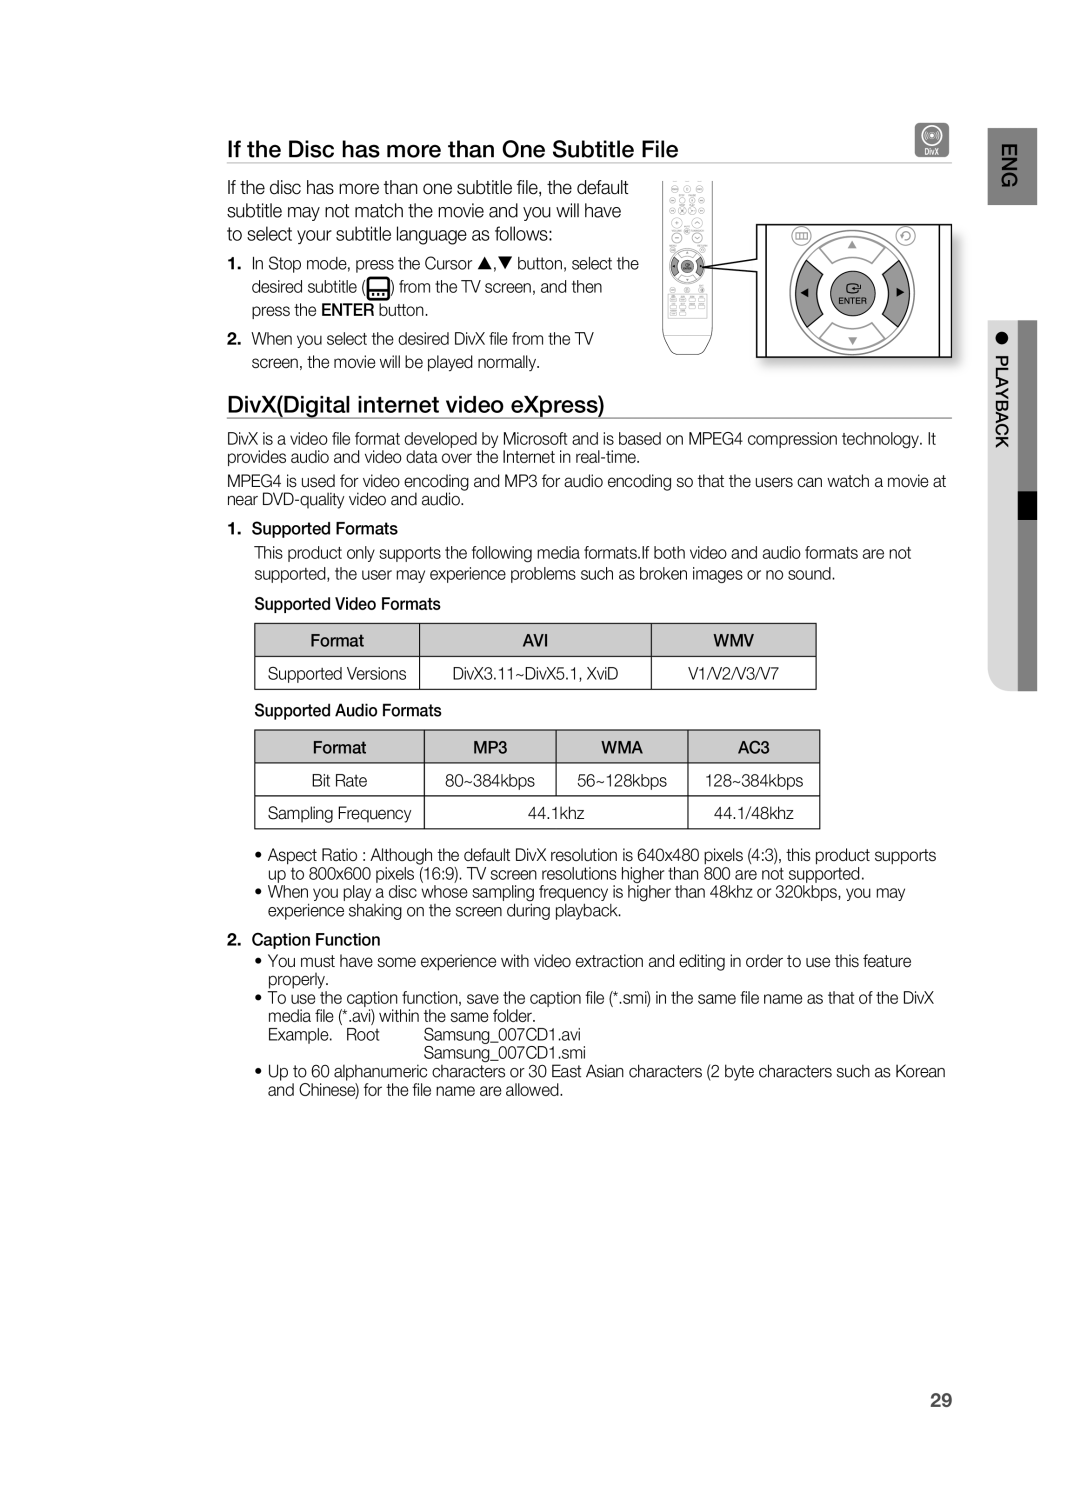 Samsung HT-A100 user manual If the Disc has more than One Subtitle File, DivXDigital internet video eXpress 